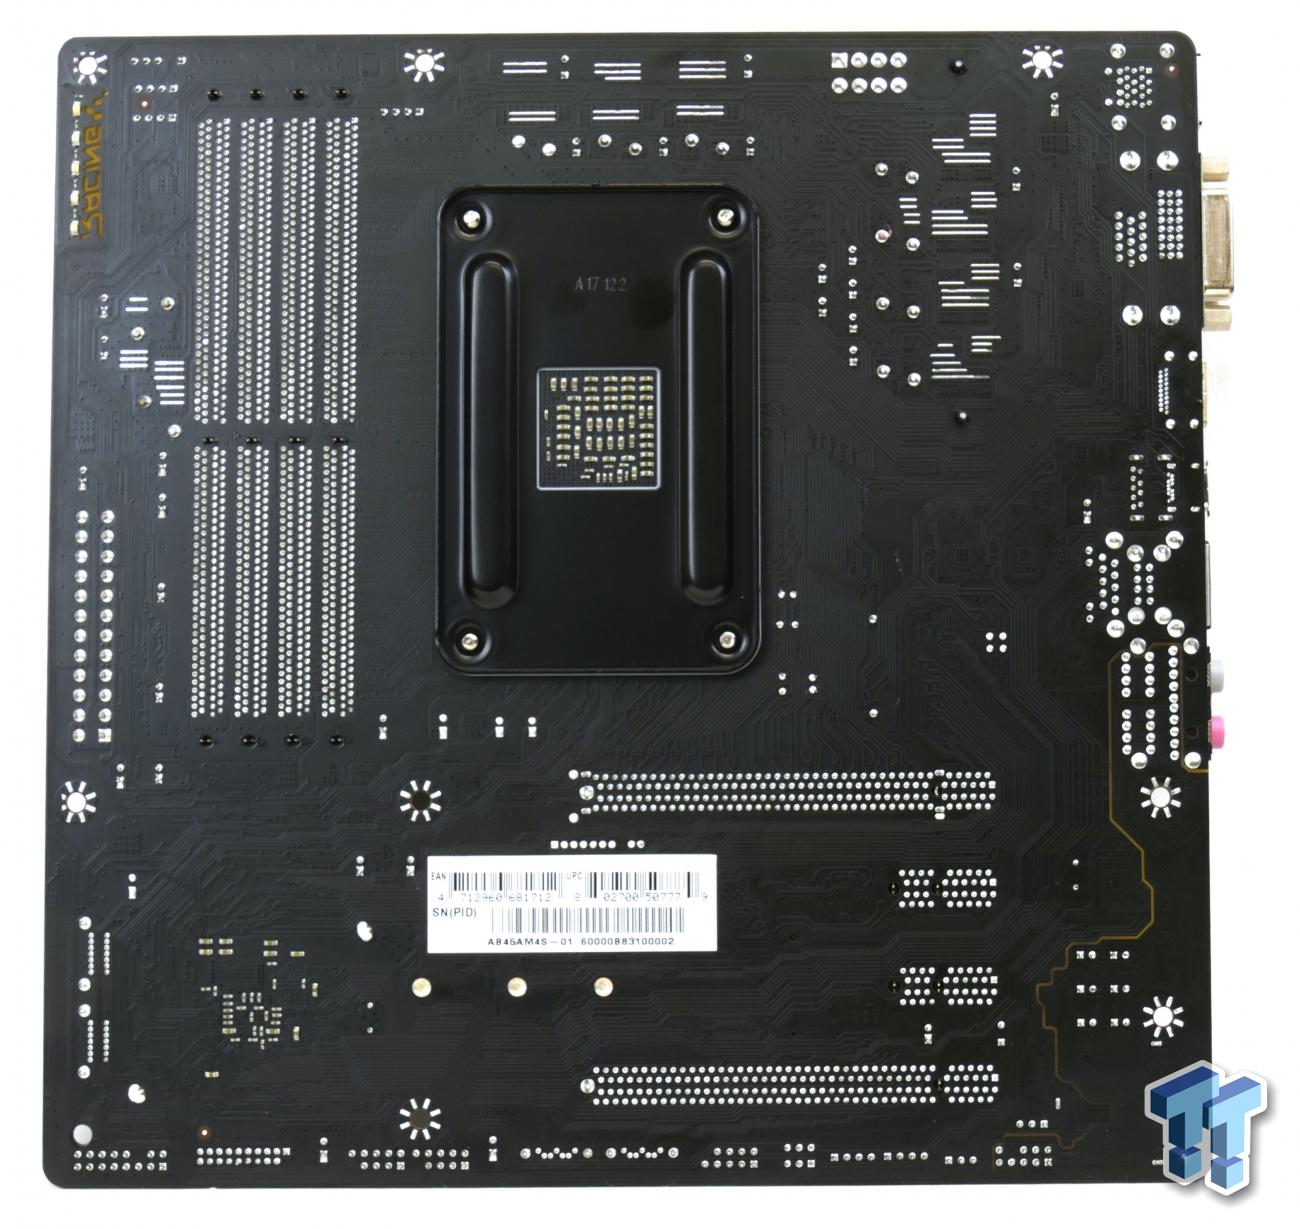 acpi x64 based pc motherboard problemsf amd